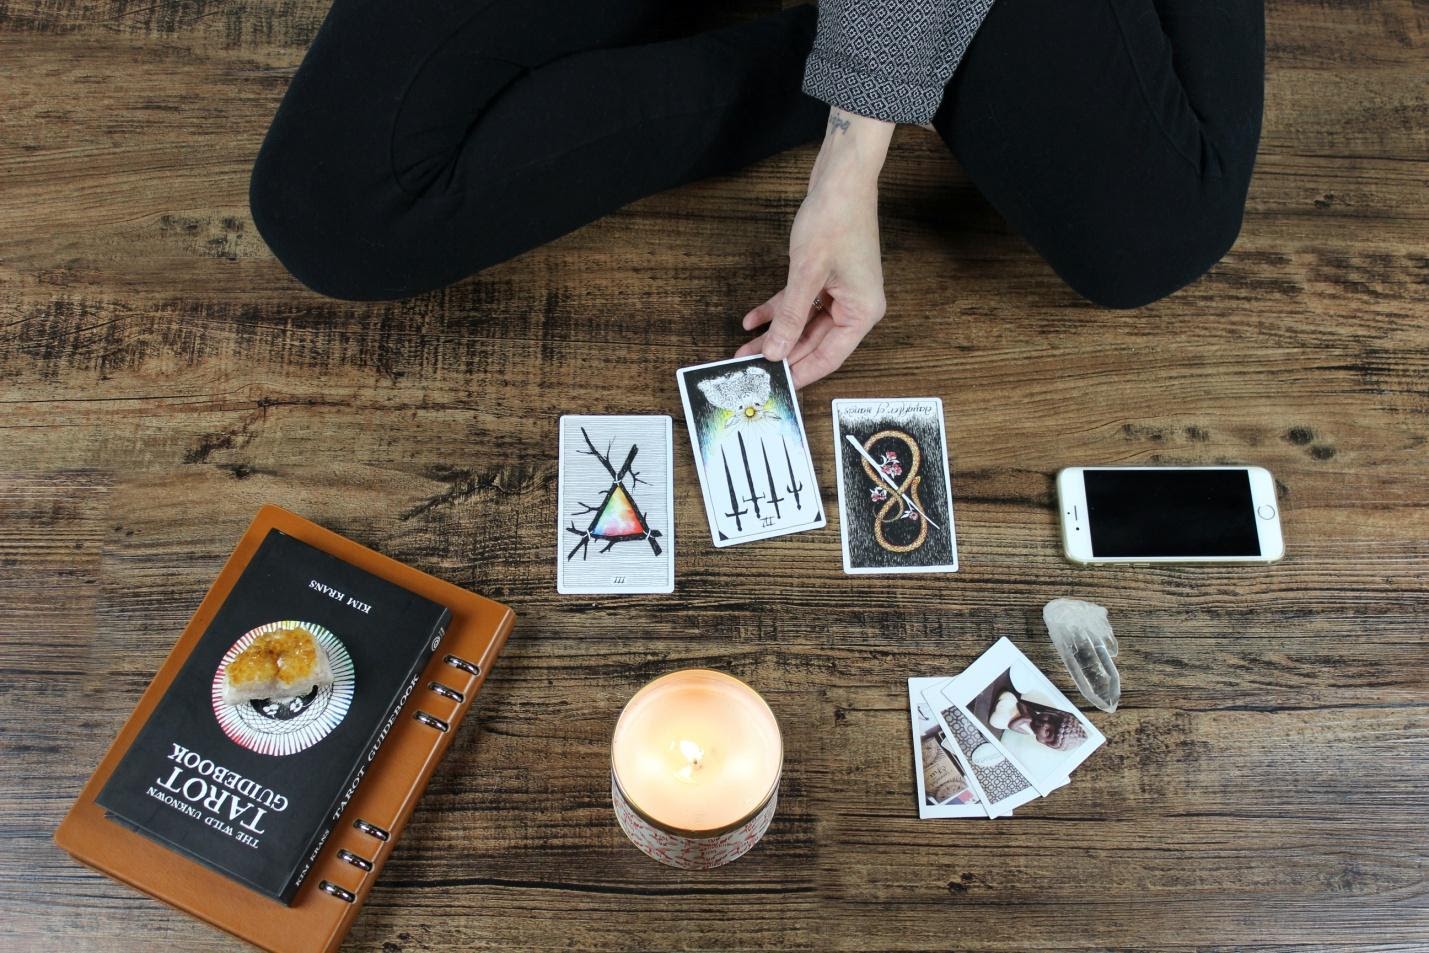 What Are The Advantages Of Tarot Card Reading?